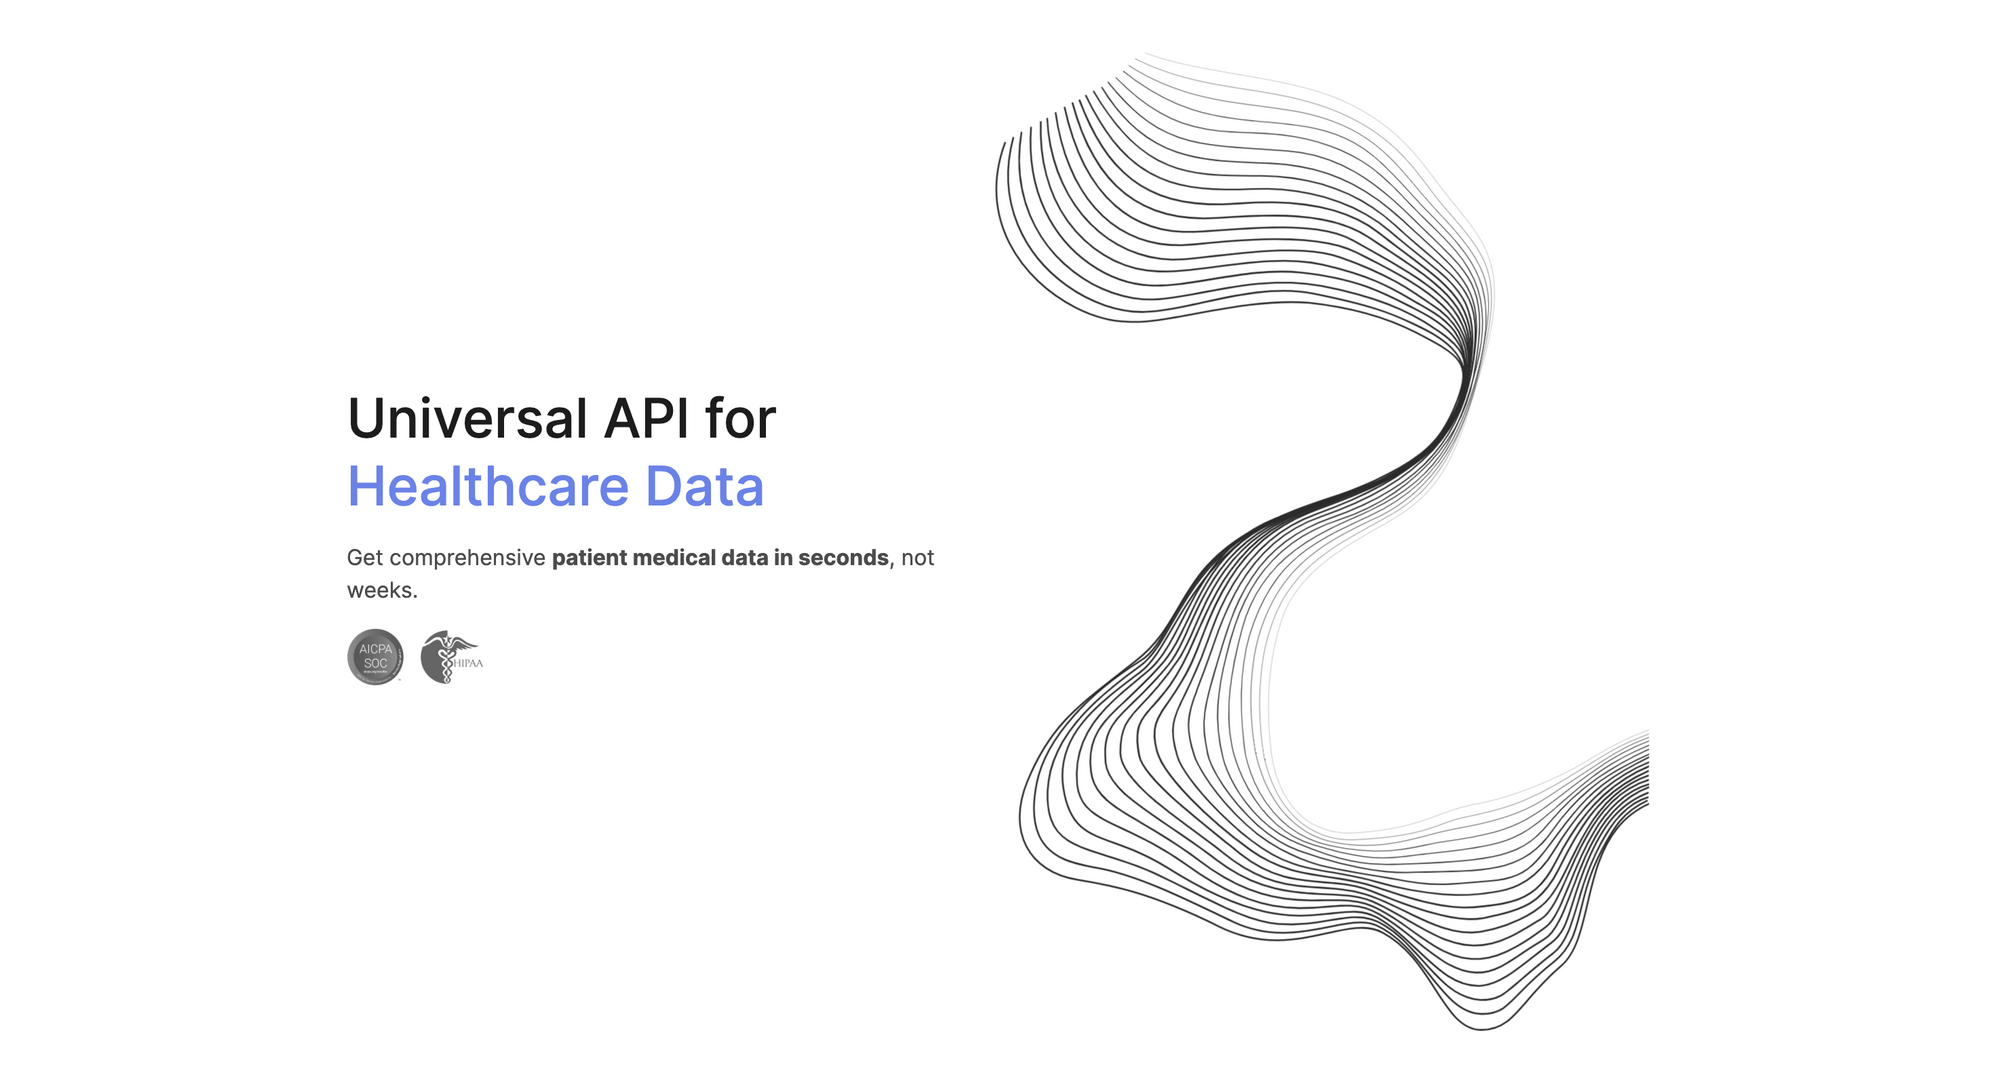 Universal API for Healthcare Data - Comprehensive medical data in seconds